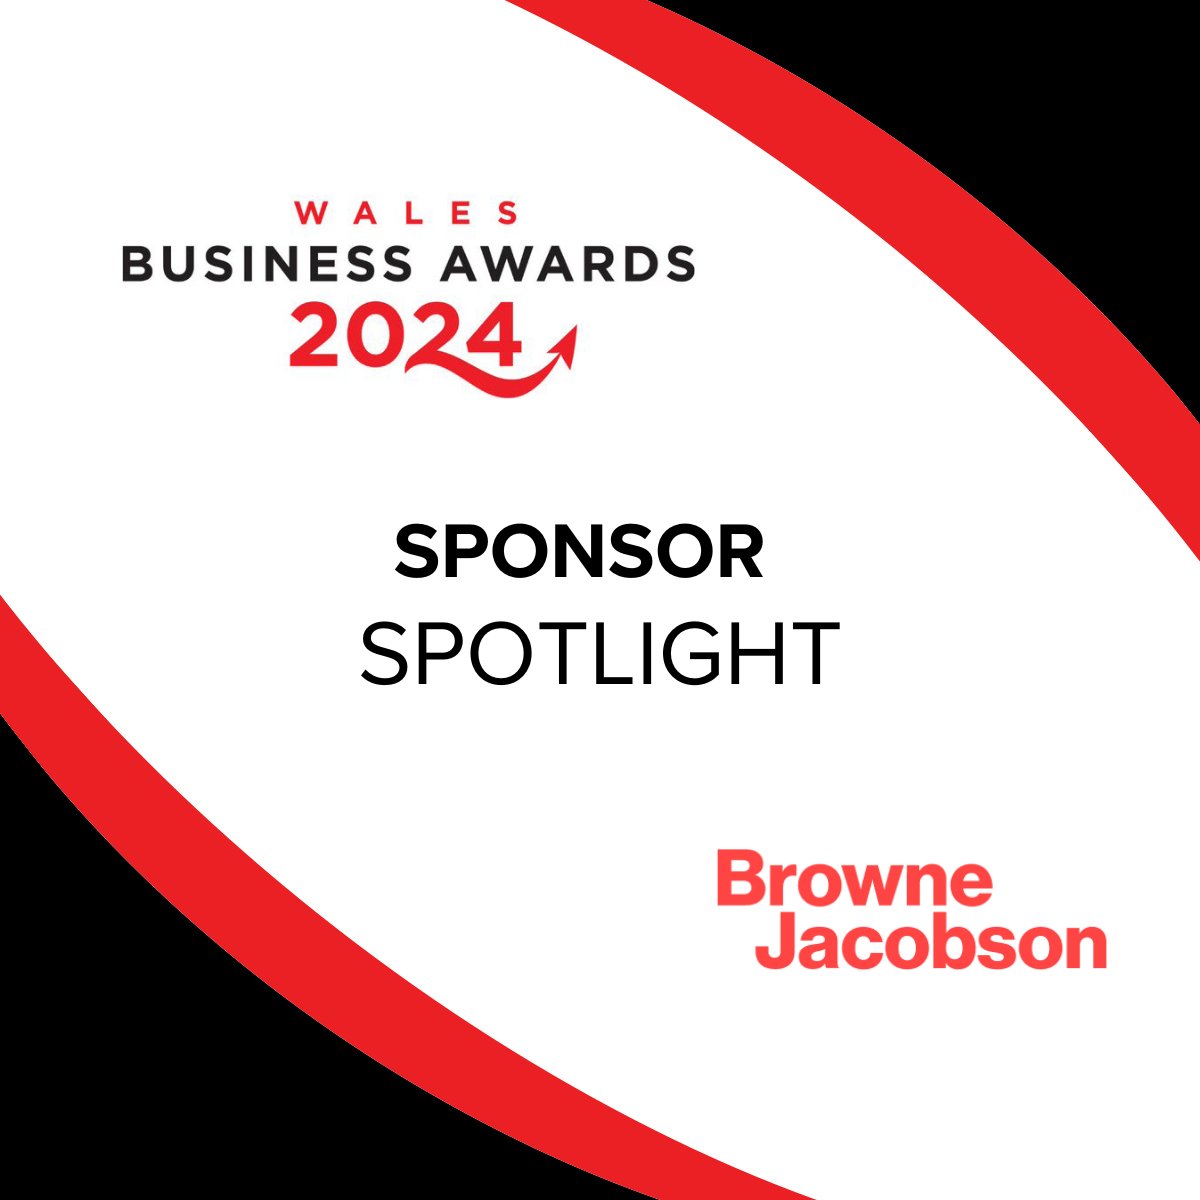 The Innovative Business of the Year award recognises businesses that have innovation at their heart. Law firm @brownejacobson is sponsoring this award. Browne Jacobson is a full-service law firm with a base in Cardiff. cw-seswm.com/news/introduci…